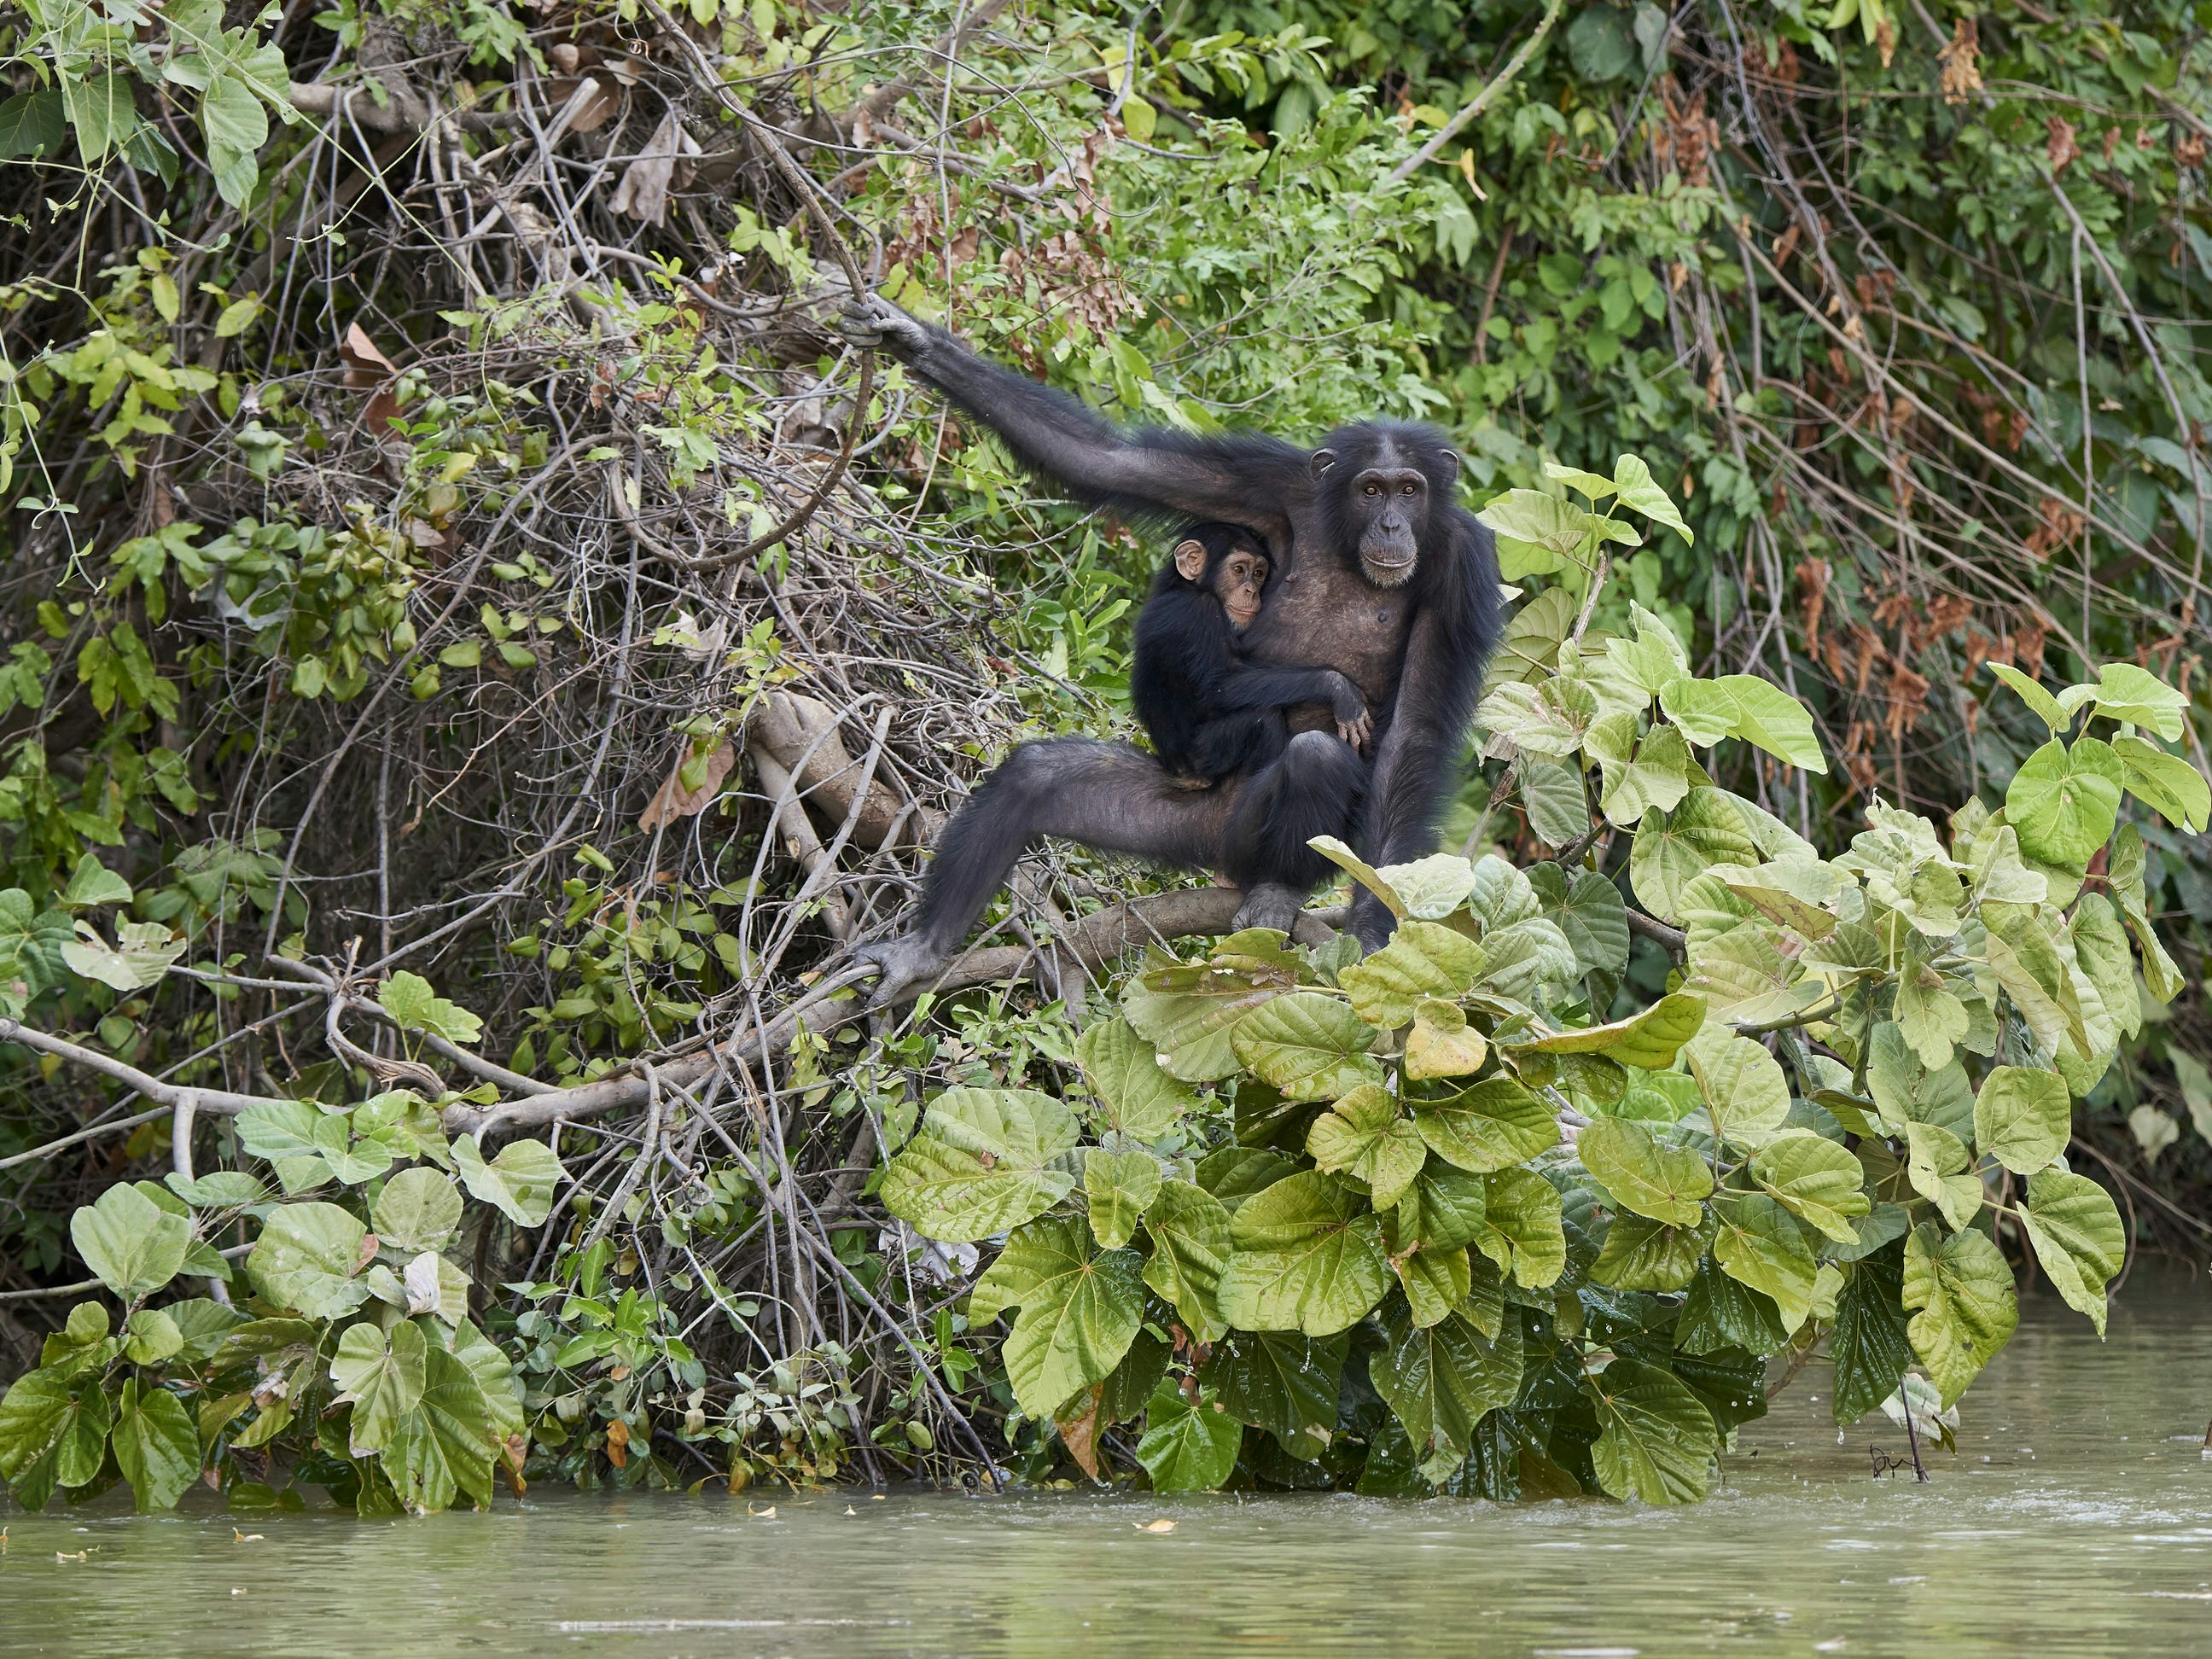 A large female chimp, with a baby clinging to her side, squats on a branch extending over the water; one of her arms extends up to a vine, on which she is holding.